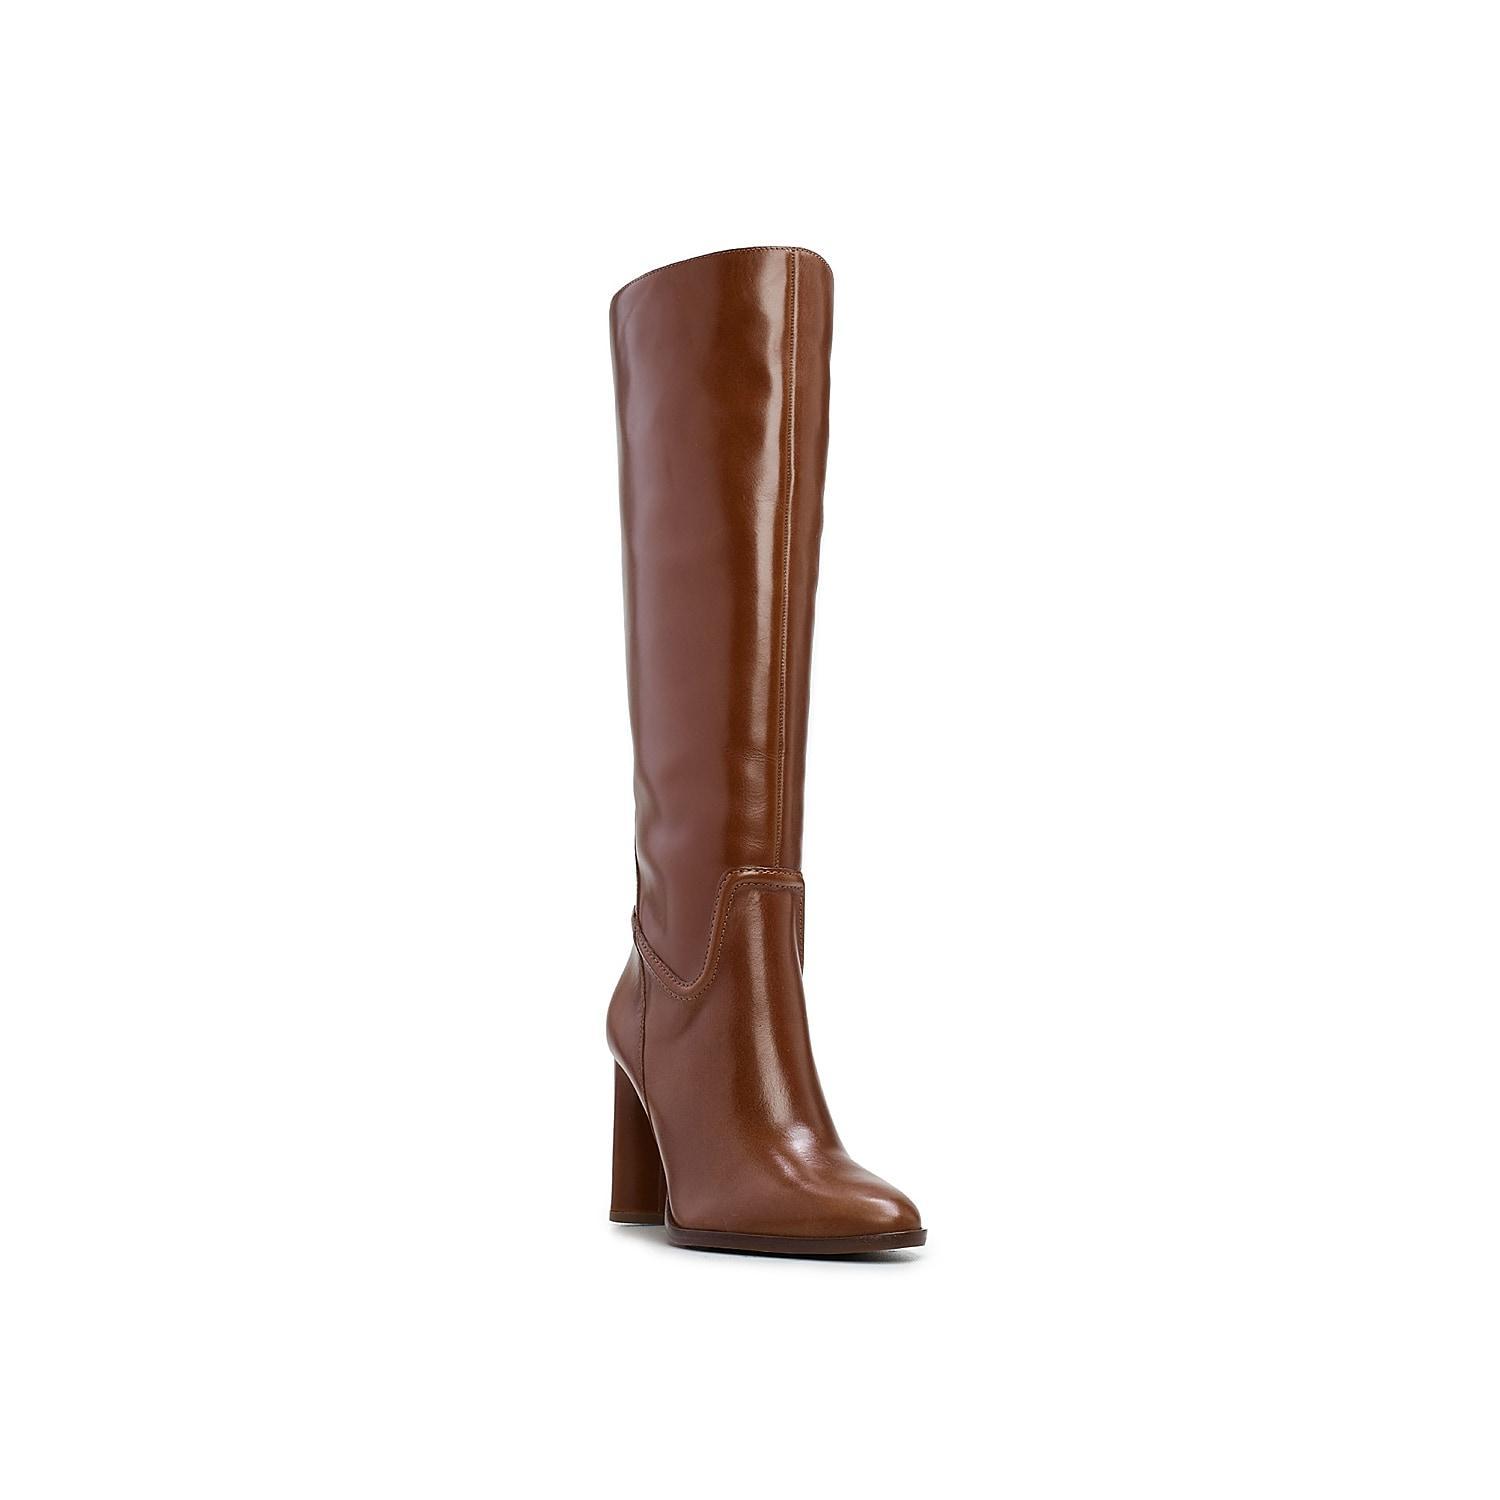 Vince Camuto Evangee Knee High Boot Product Image